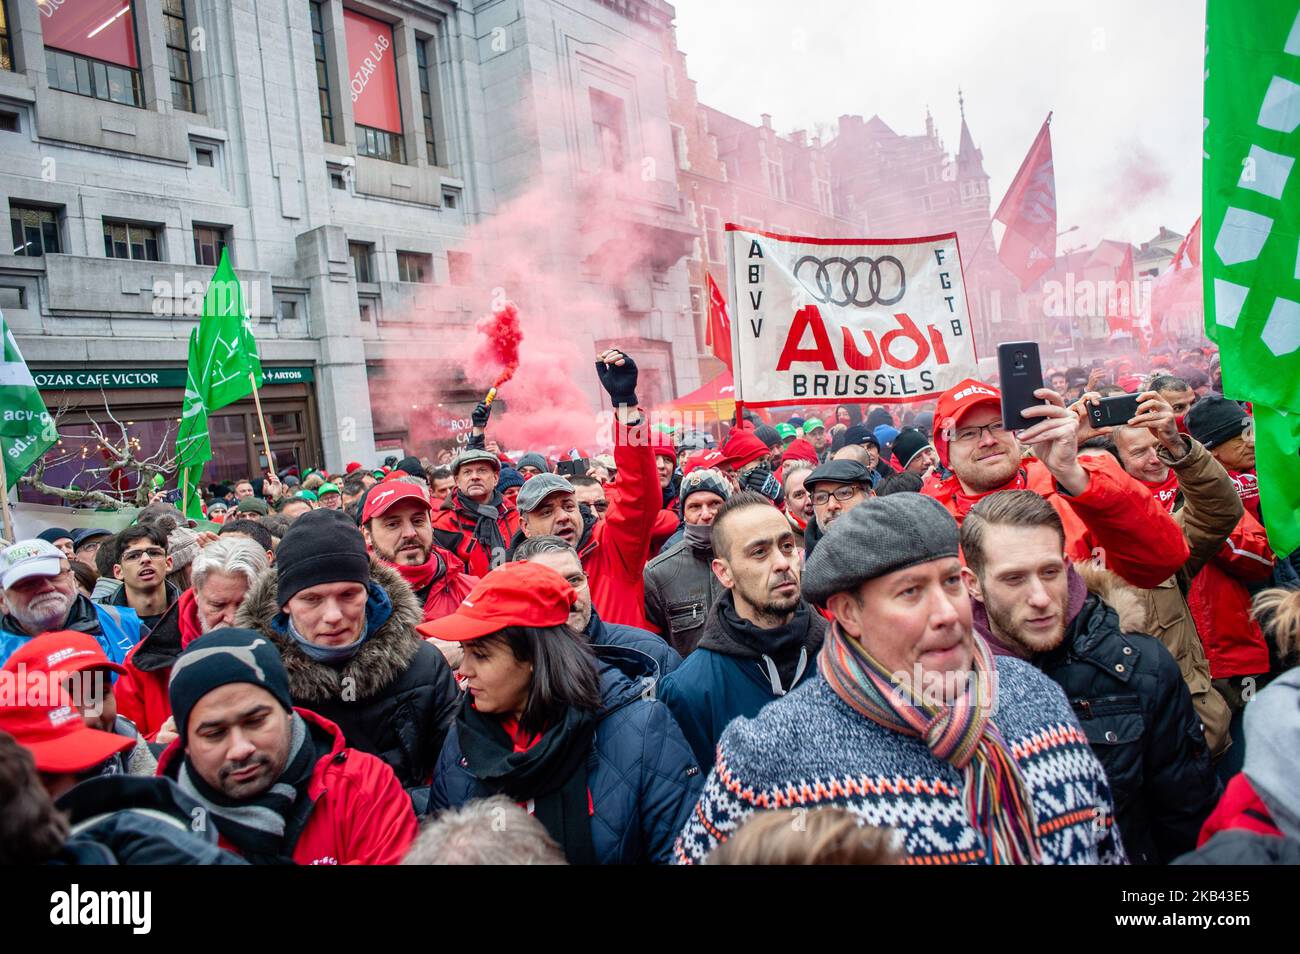 On December 14th, 2018 in Brussels, Belgium. The FGTB, CGSLB and CSC main trade unions have also called for nationwide protest movements to take place on December 14 to denounce the government economic policies. A rally of the joint trade union front was held at 11 am Friday outside of the FEB (Federation of Enterprises in Belgium) headquarters in the Belgian capital. Thousands of workers gathered to demand fair careers and decent pensions. Outside of the FEB (Federation of Enterprises in Belgium) the protesters thrown red paint and eggs to the building. With over 1.2 million members, the Gene Stock Photo